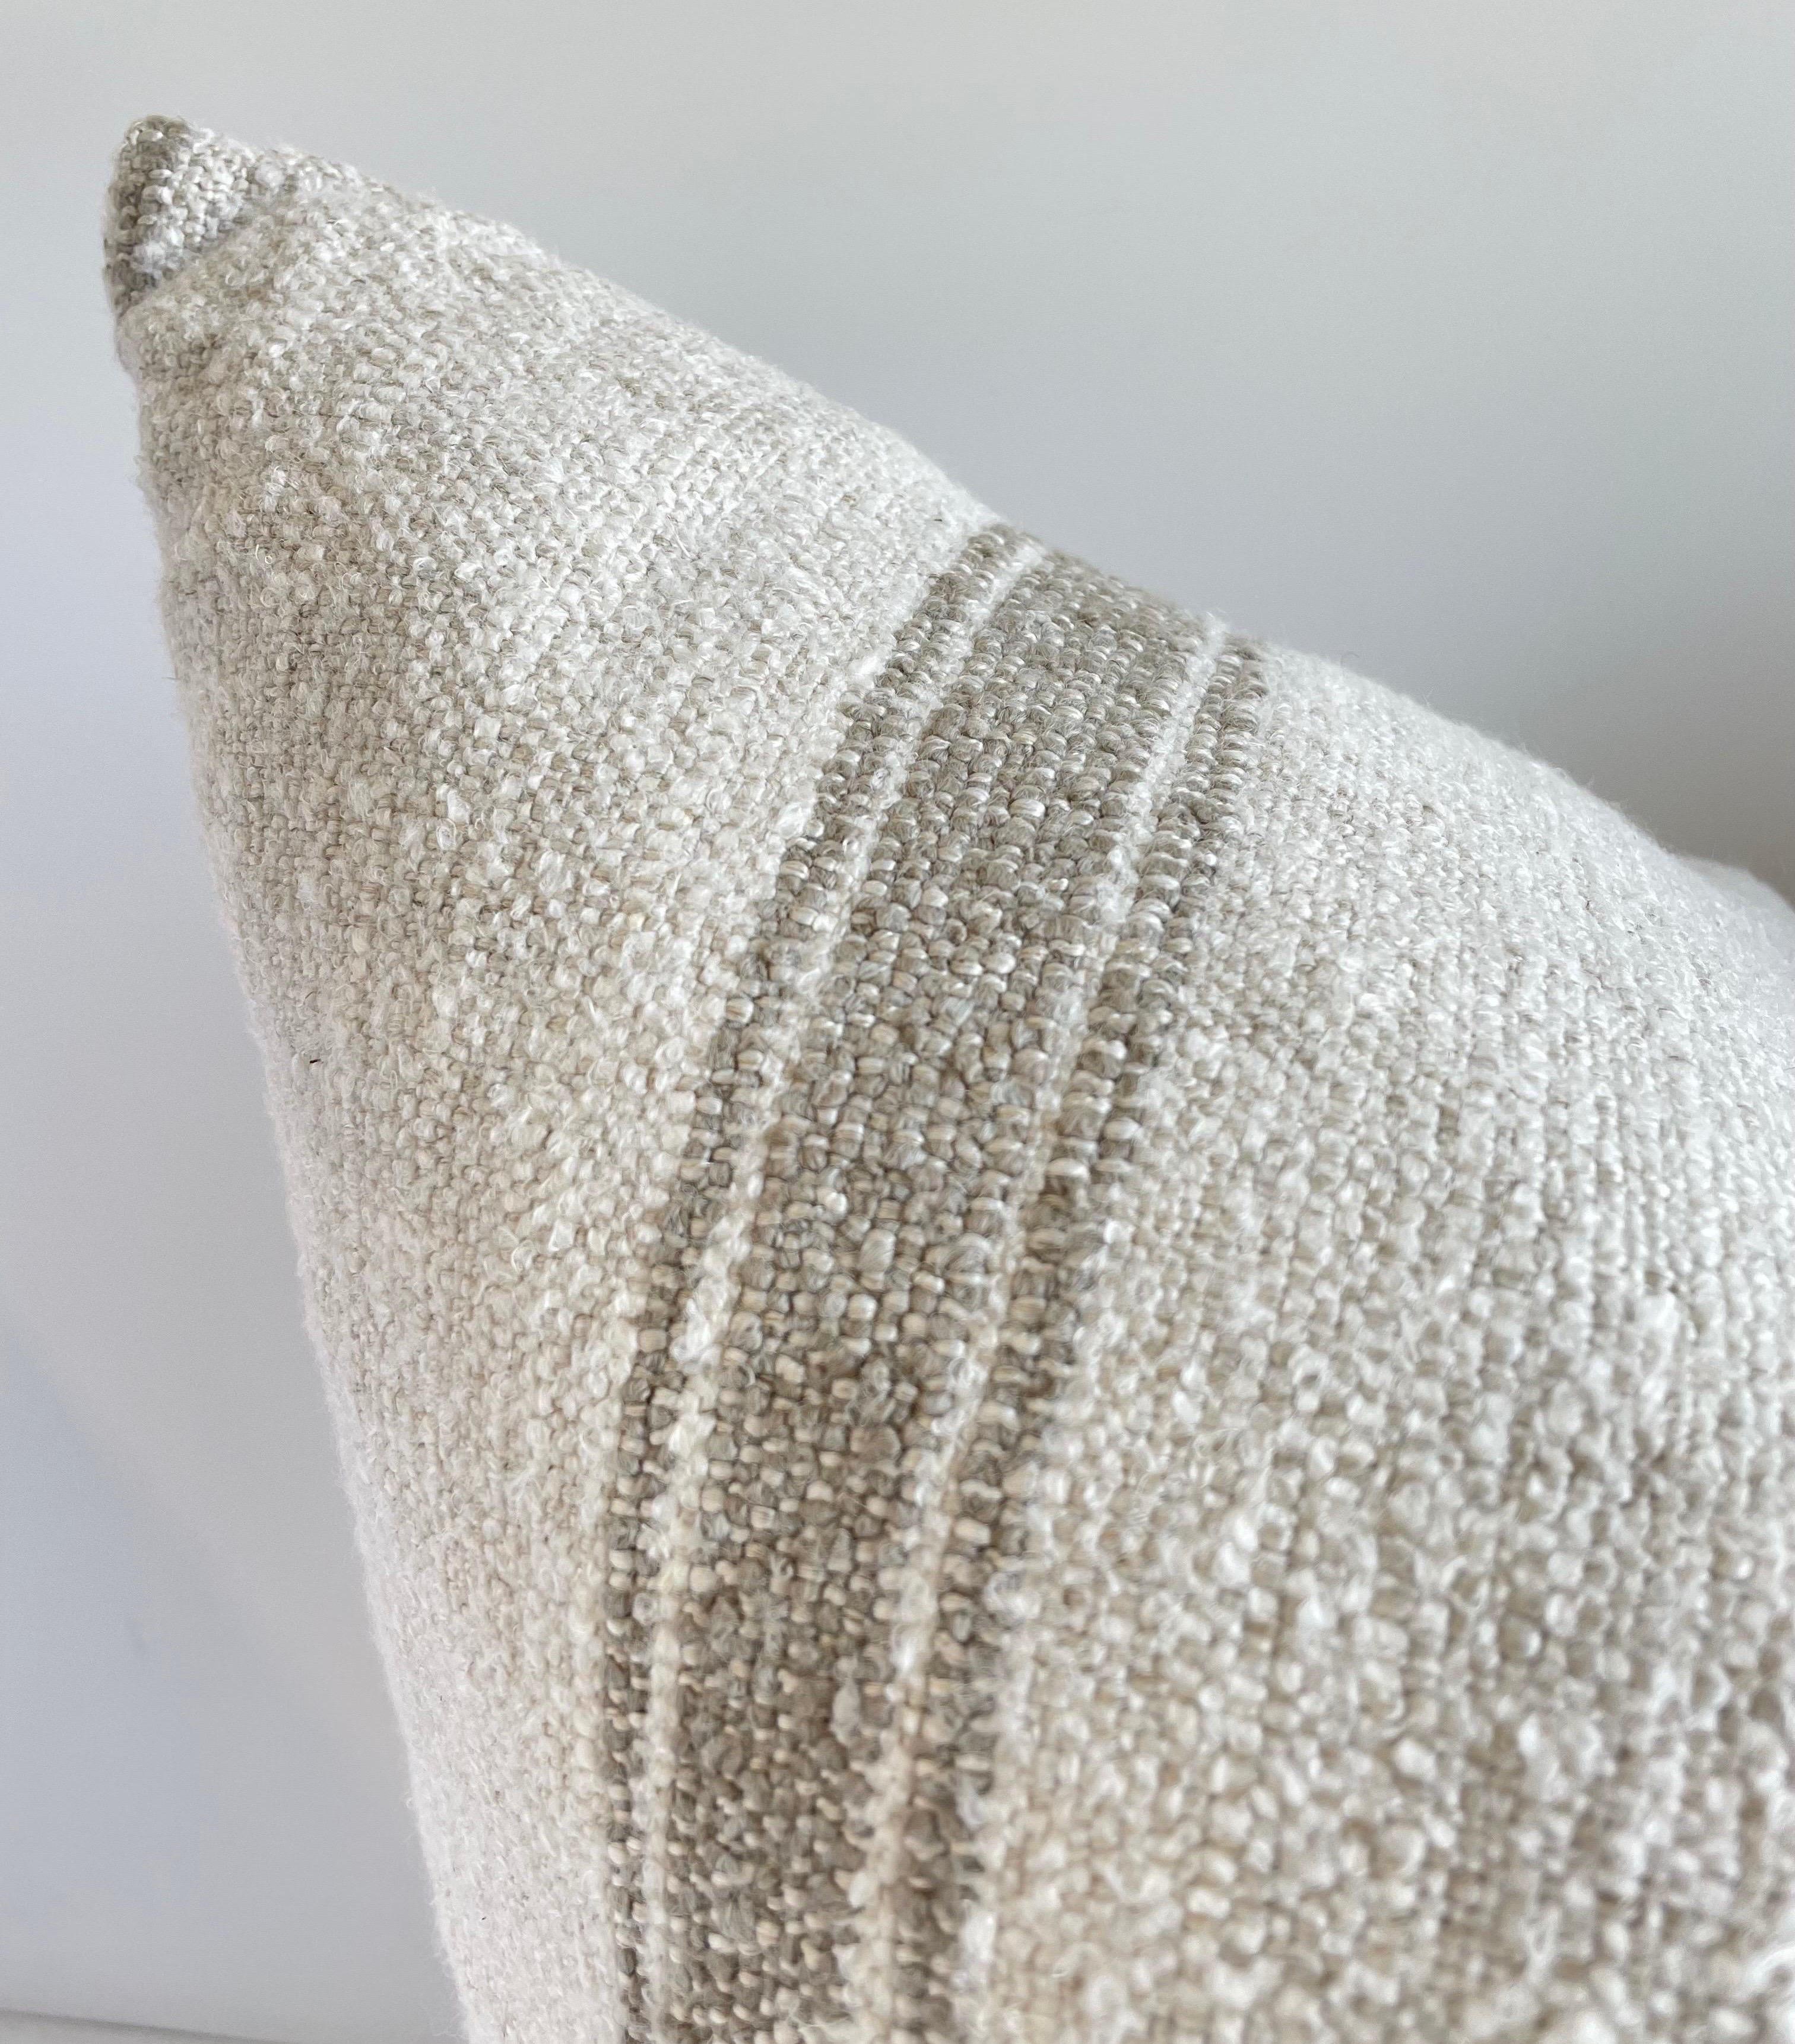 Woven in Belgium using traditional weaving techniques, Bloom Home Inc. Daisy features a Belgian Linen warp and alternating Belgian Linen/Mixed Fiber weft. The alternating wefts create a stripe that plays with both texture and color. These pillows